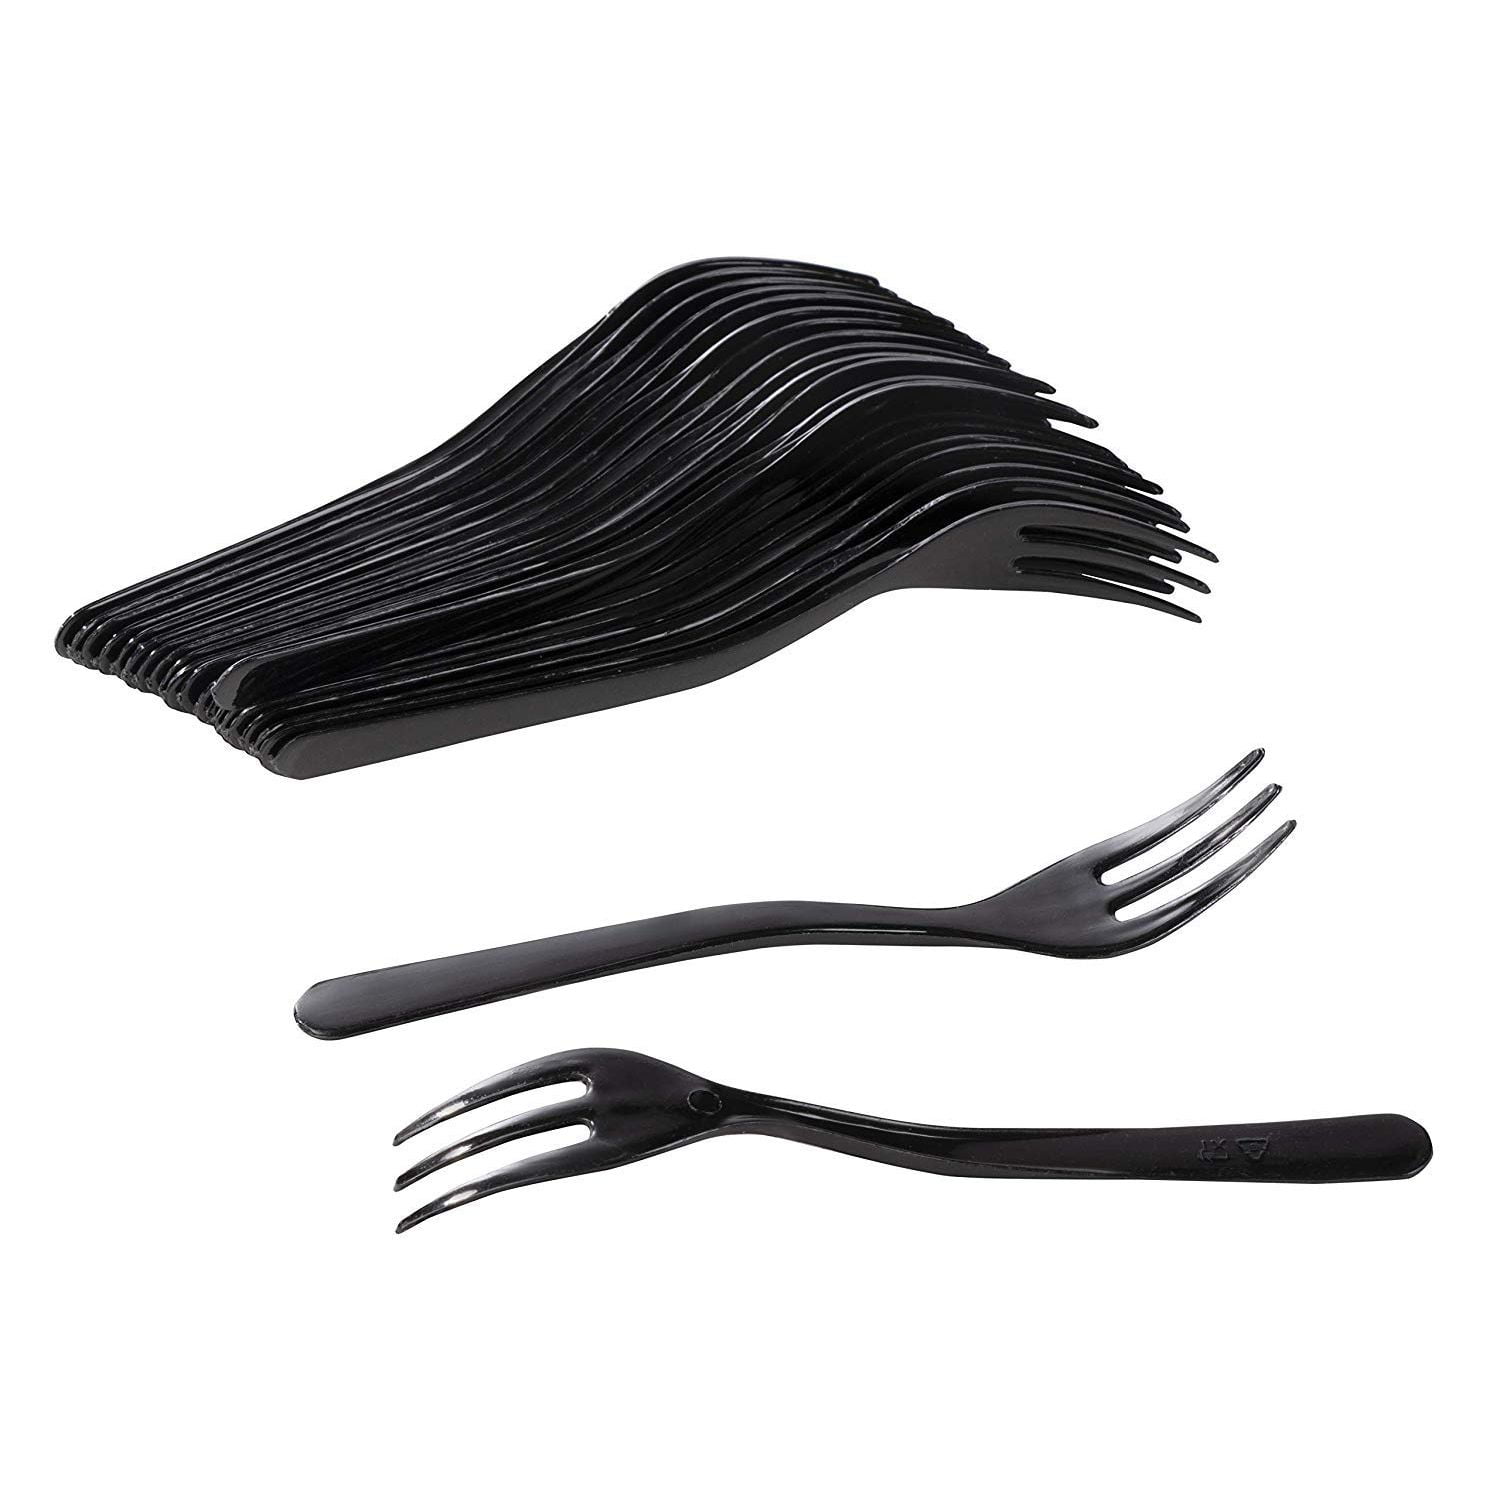 Mini Tasting Forks Dessert Shooters Disposable Forks for Salad Black Catering Party Supplies 150-Pack Plastic Tasting Sampling Forks Set Small Appetizers Fruit 3.5 x 0.6 Inches